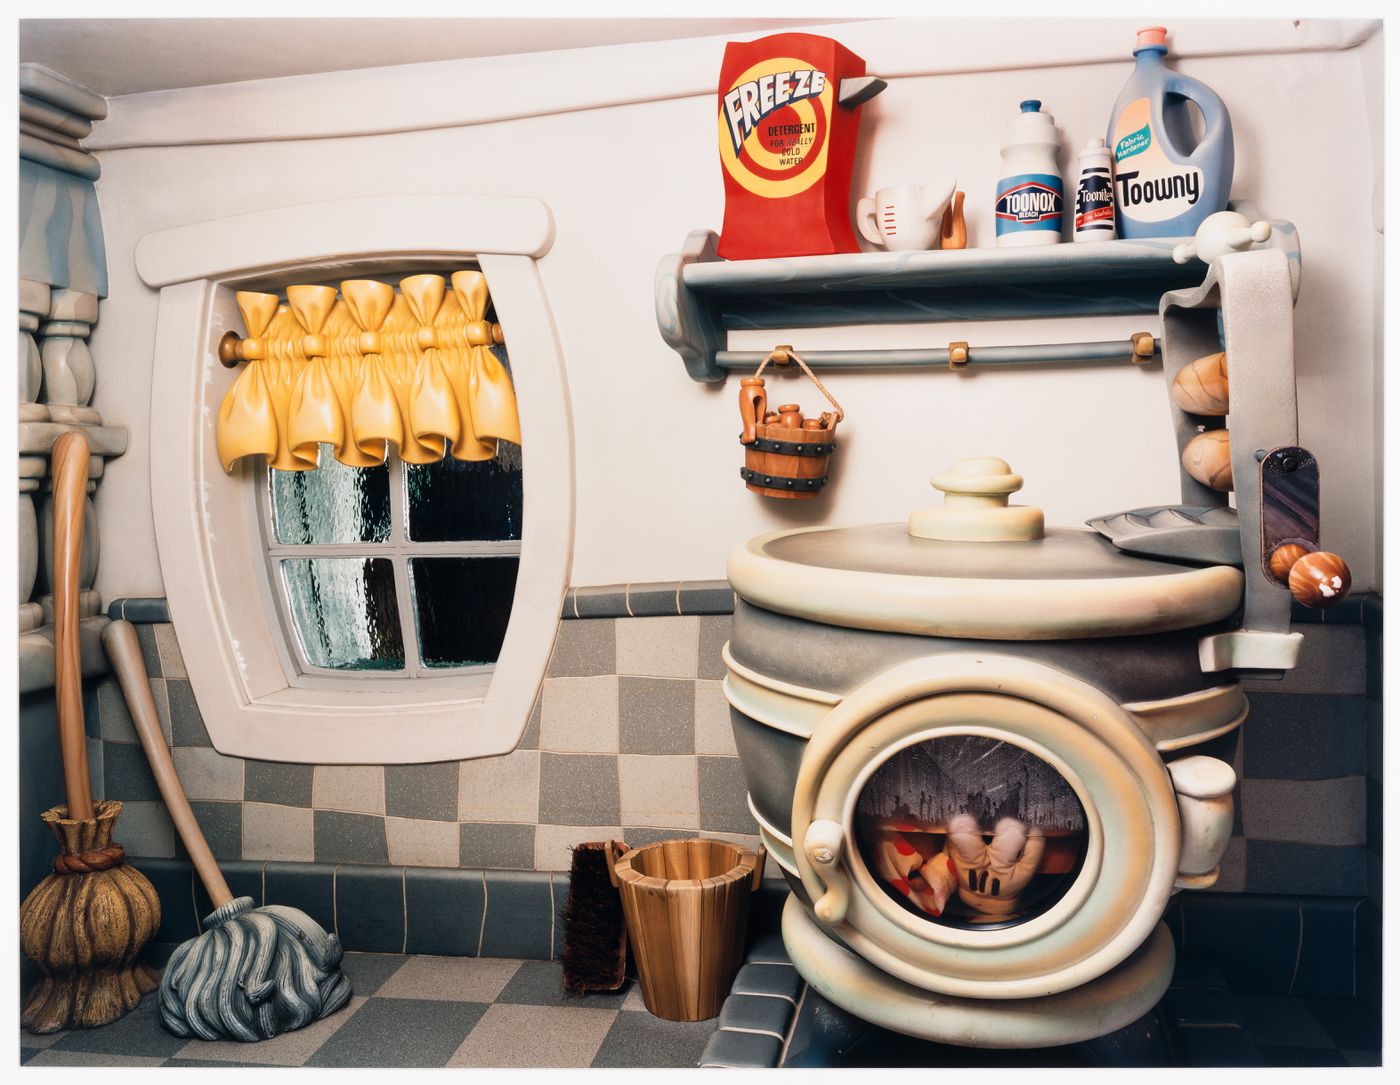 View of Mickey Mouse's laundry room, Mickey's Toontown, Disneyland, Anaheim, California, United States